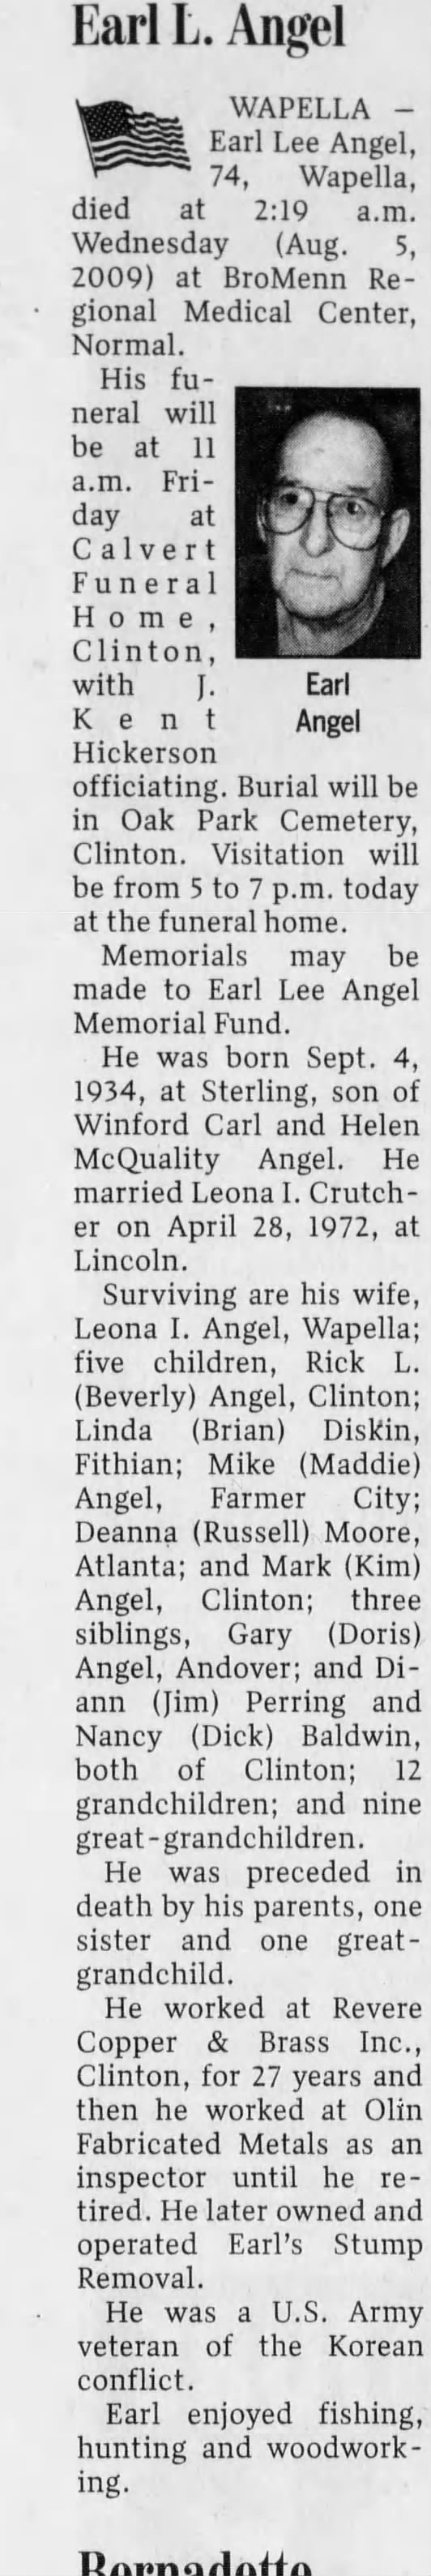 Obituary for Earl Lee Angel, 1934-2009 (Aged 74)